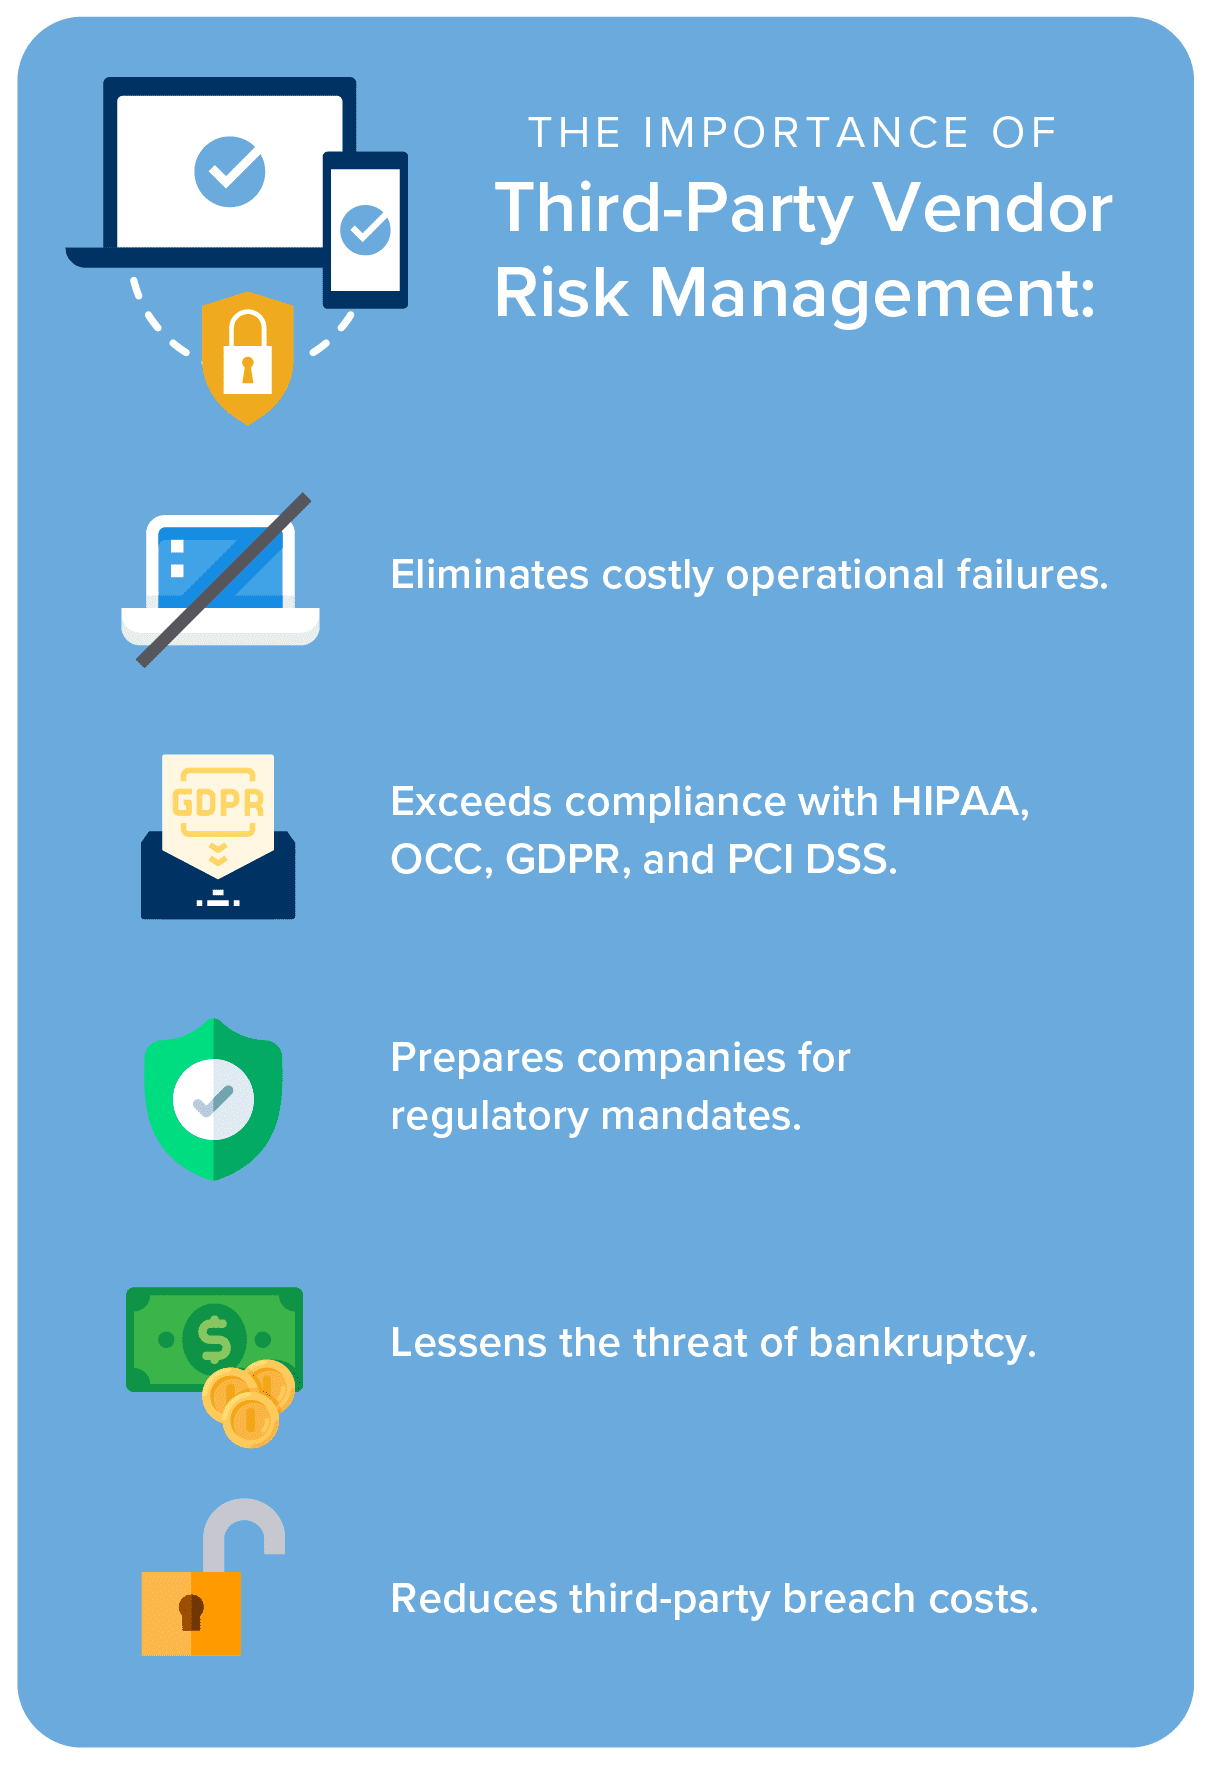 the importance of third-party vendor risk management